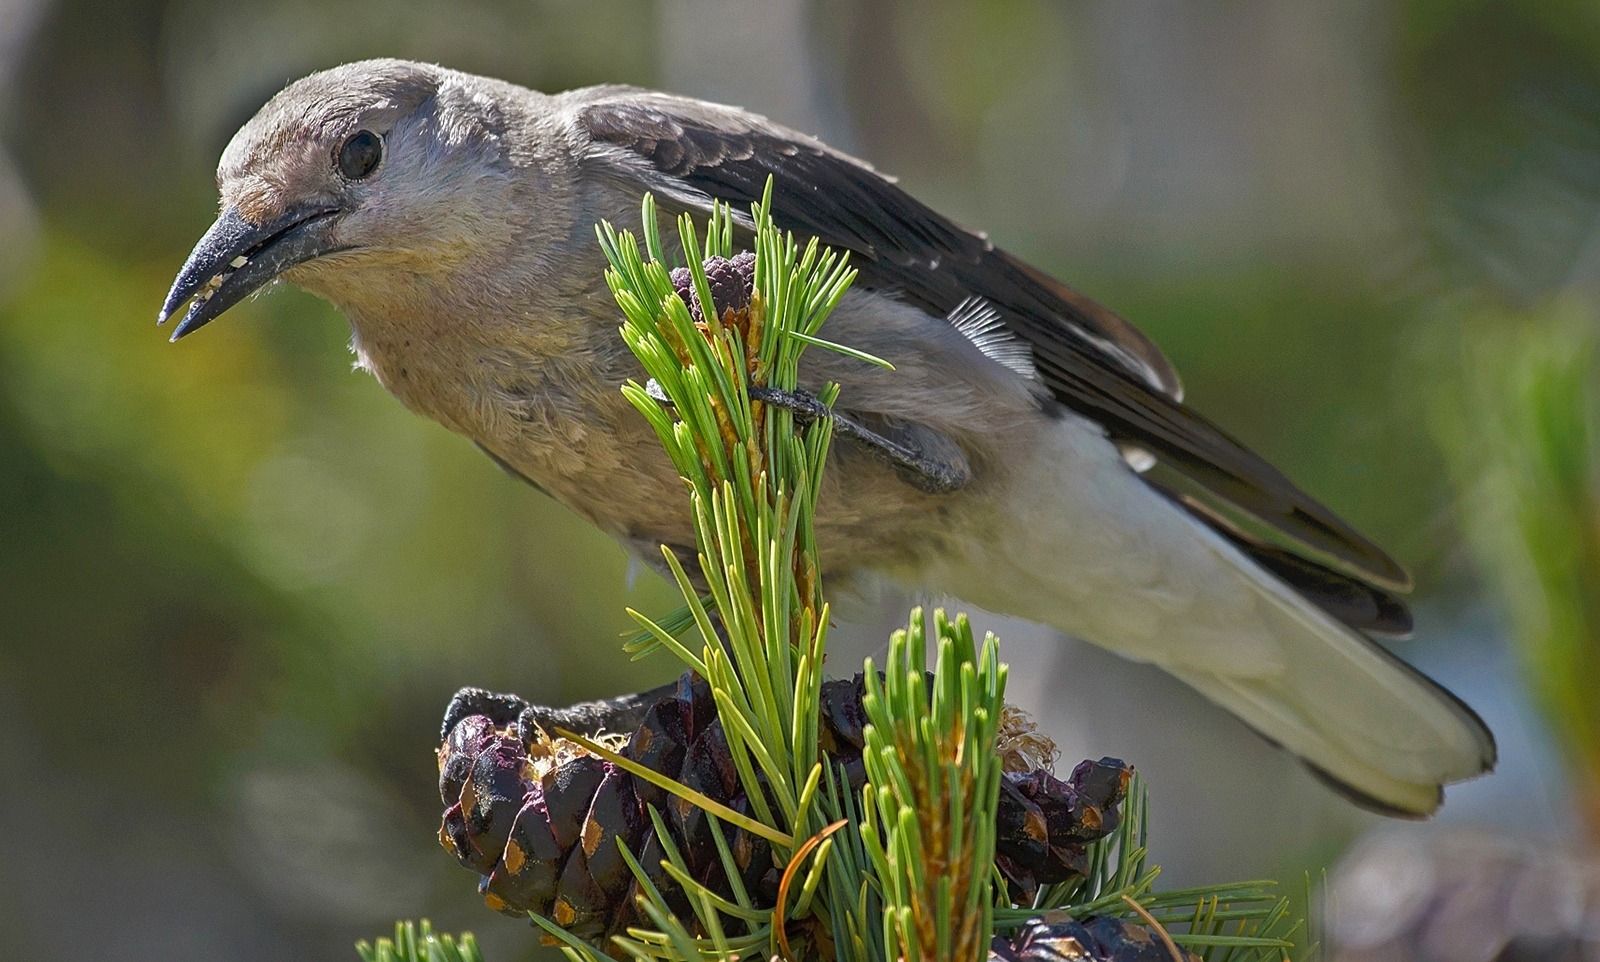 Clark’s nutcracker extracting seeds from a whitebark pine cone. Photo courtesy U.S. Forest Service